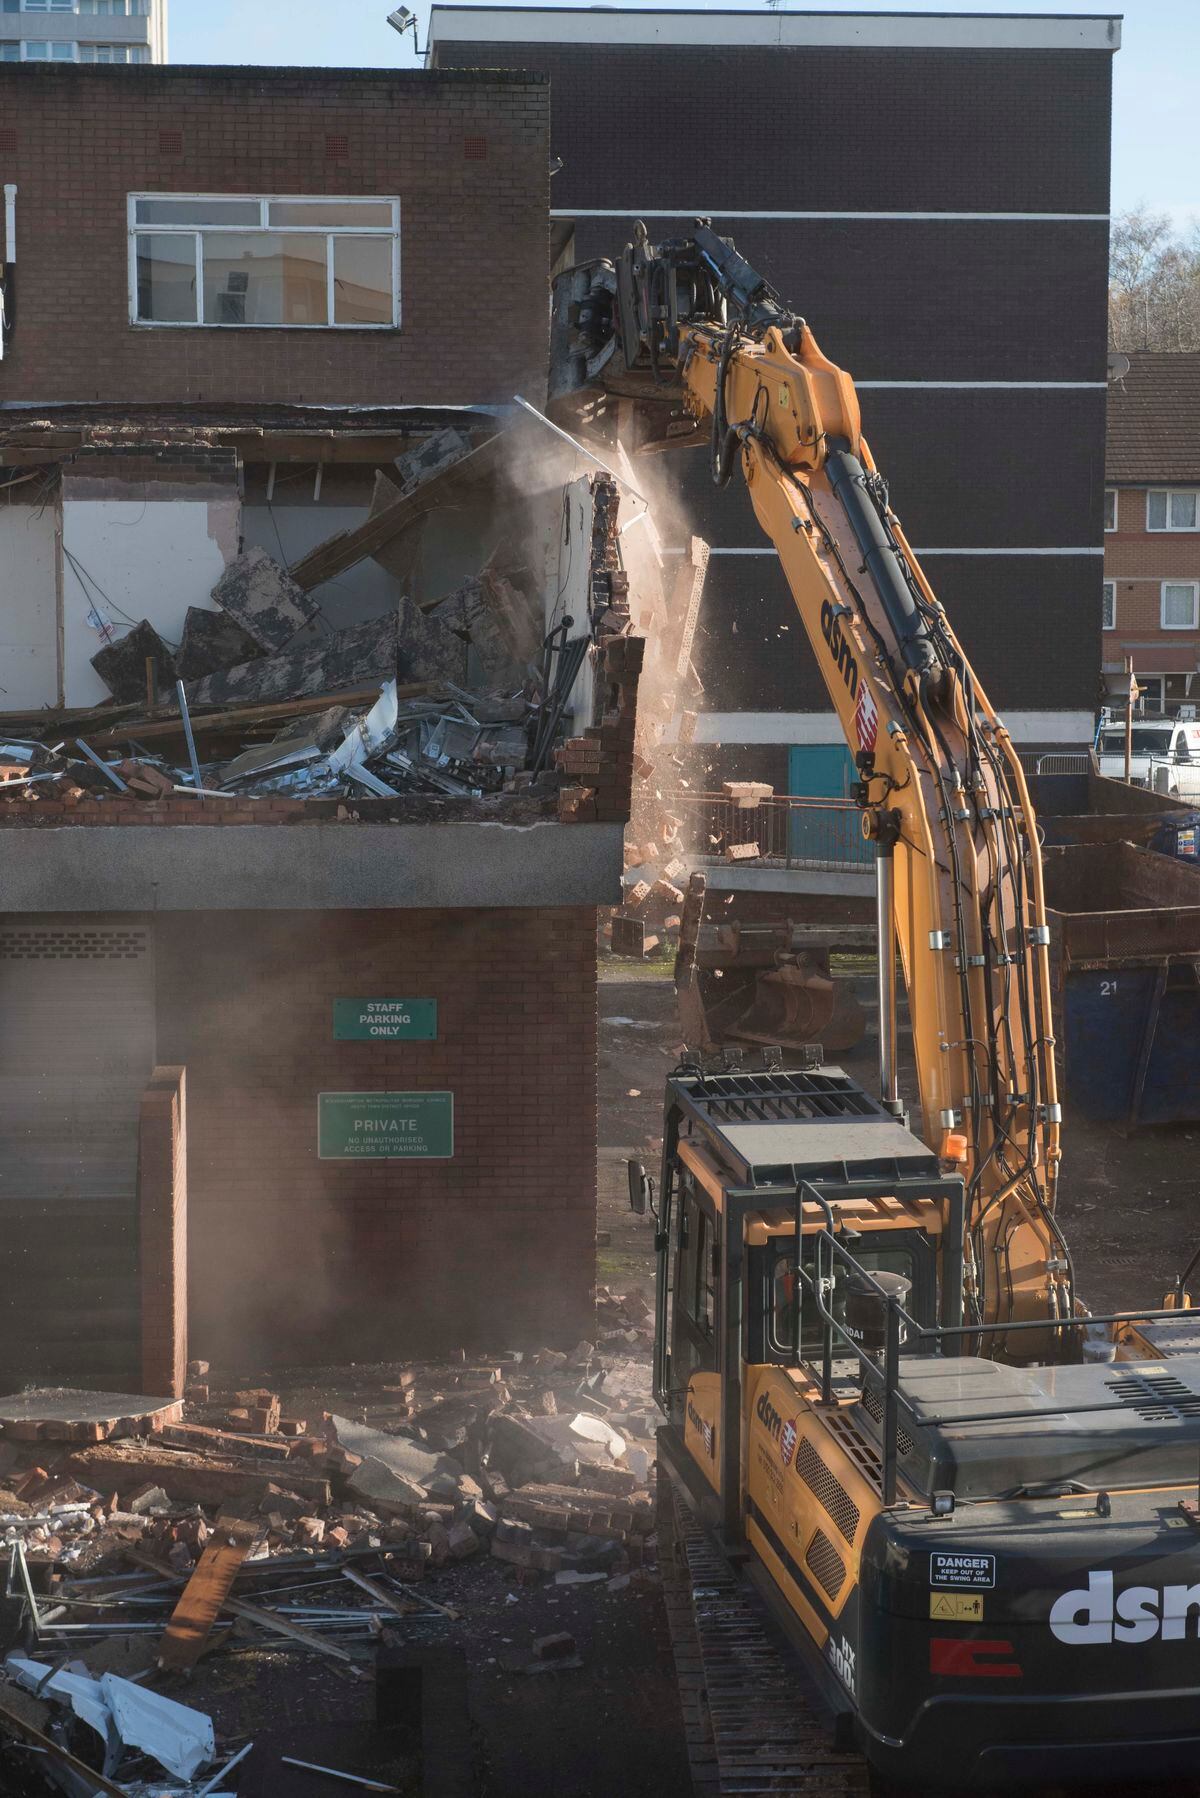 The latest view of the Heath Town demolition work.